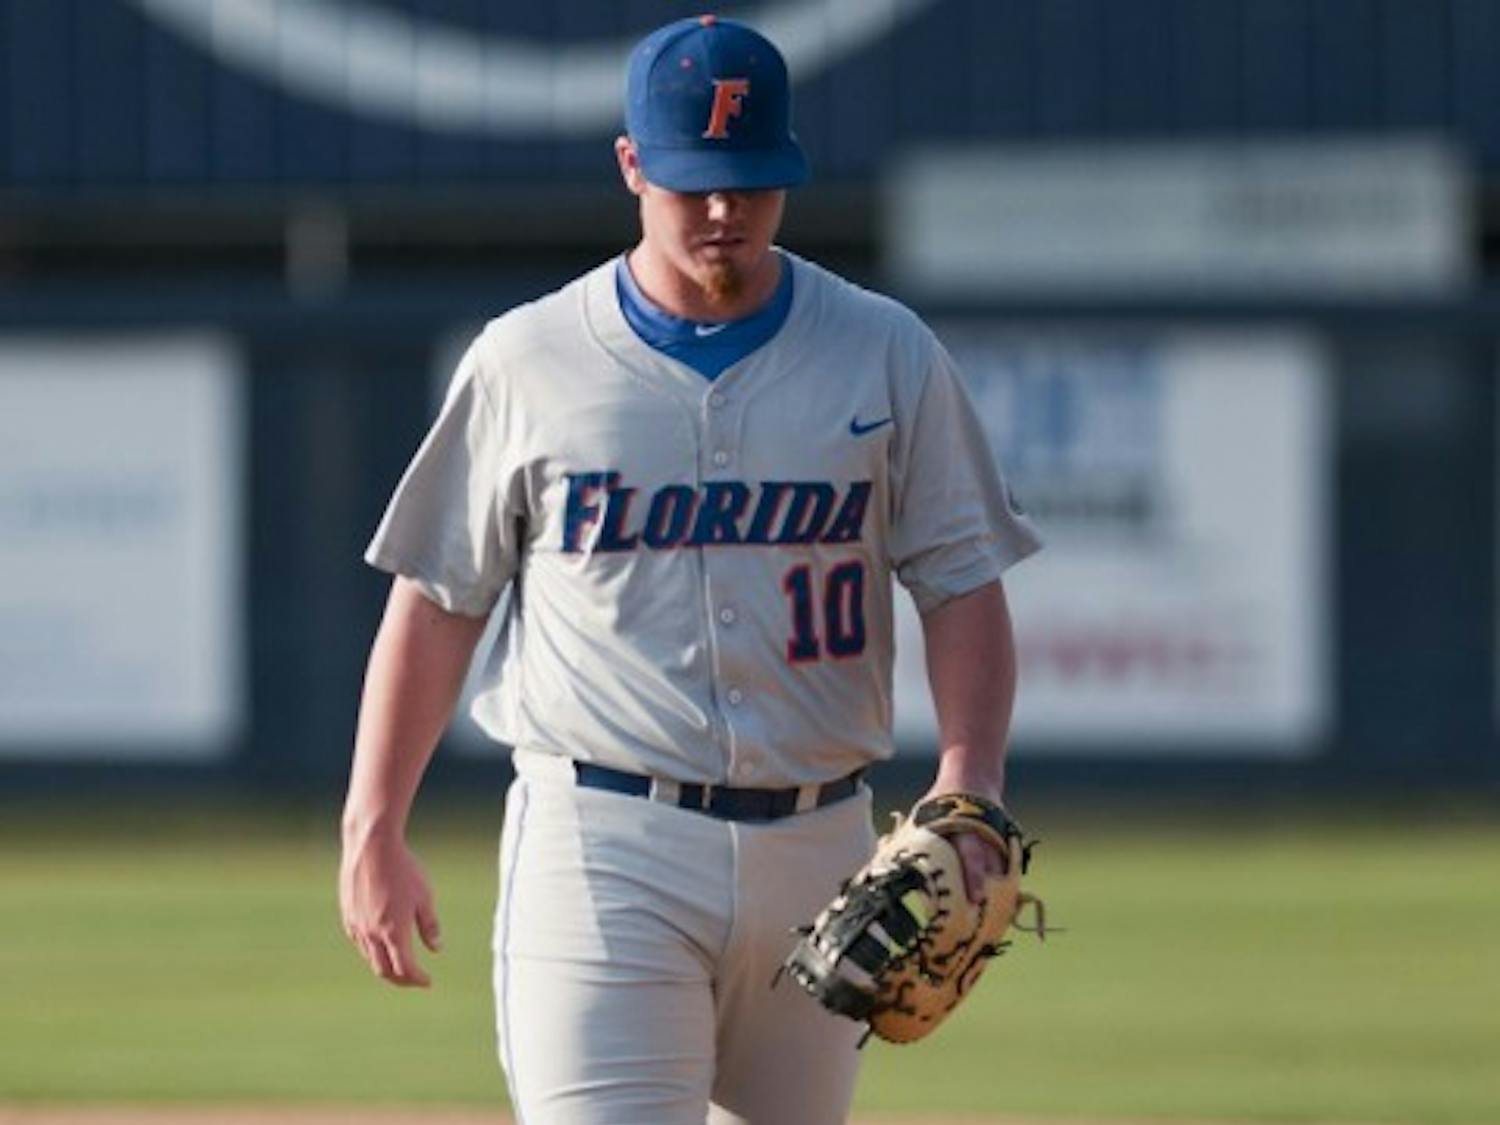 Florida first baseman and relief pitcher Austin Maddox walks off the field during UF’s 10-5 loss to North Florida on Tuesday. Maddox and the Gators combined to commit three errors.